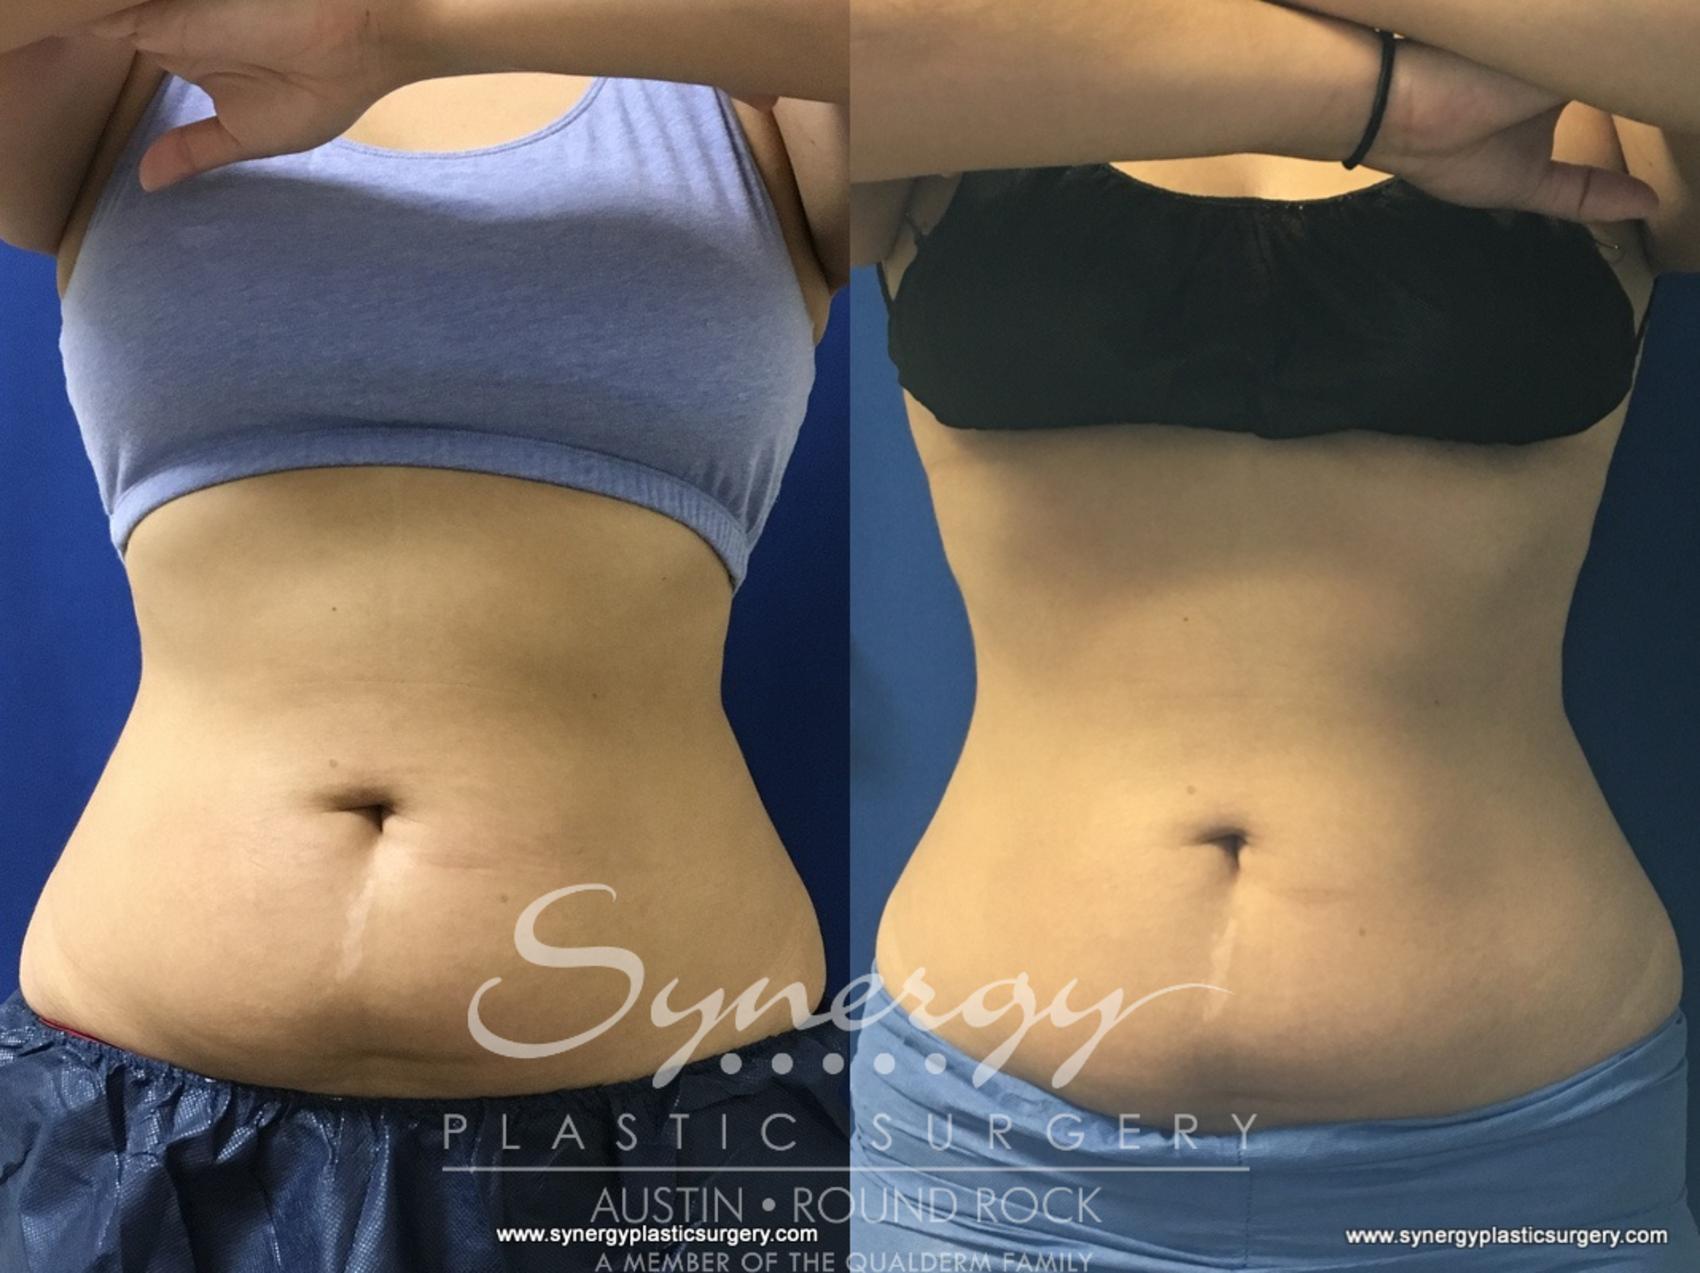 CoolSculpting Before & After Photos  Cool sculpting, Coolsculpting before  and after, Lipo before and after